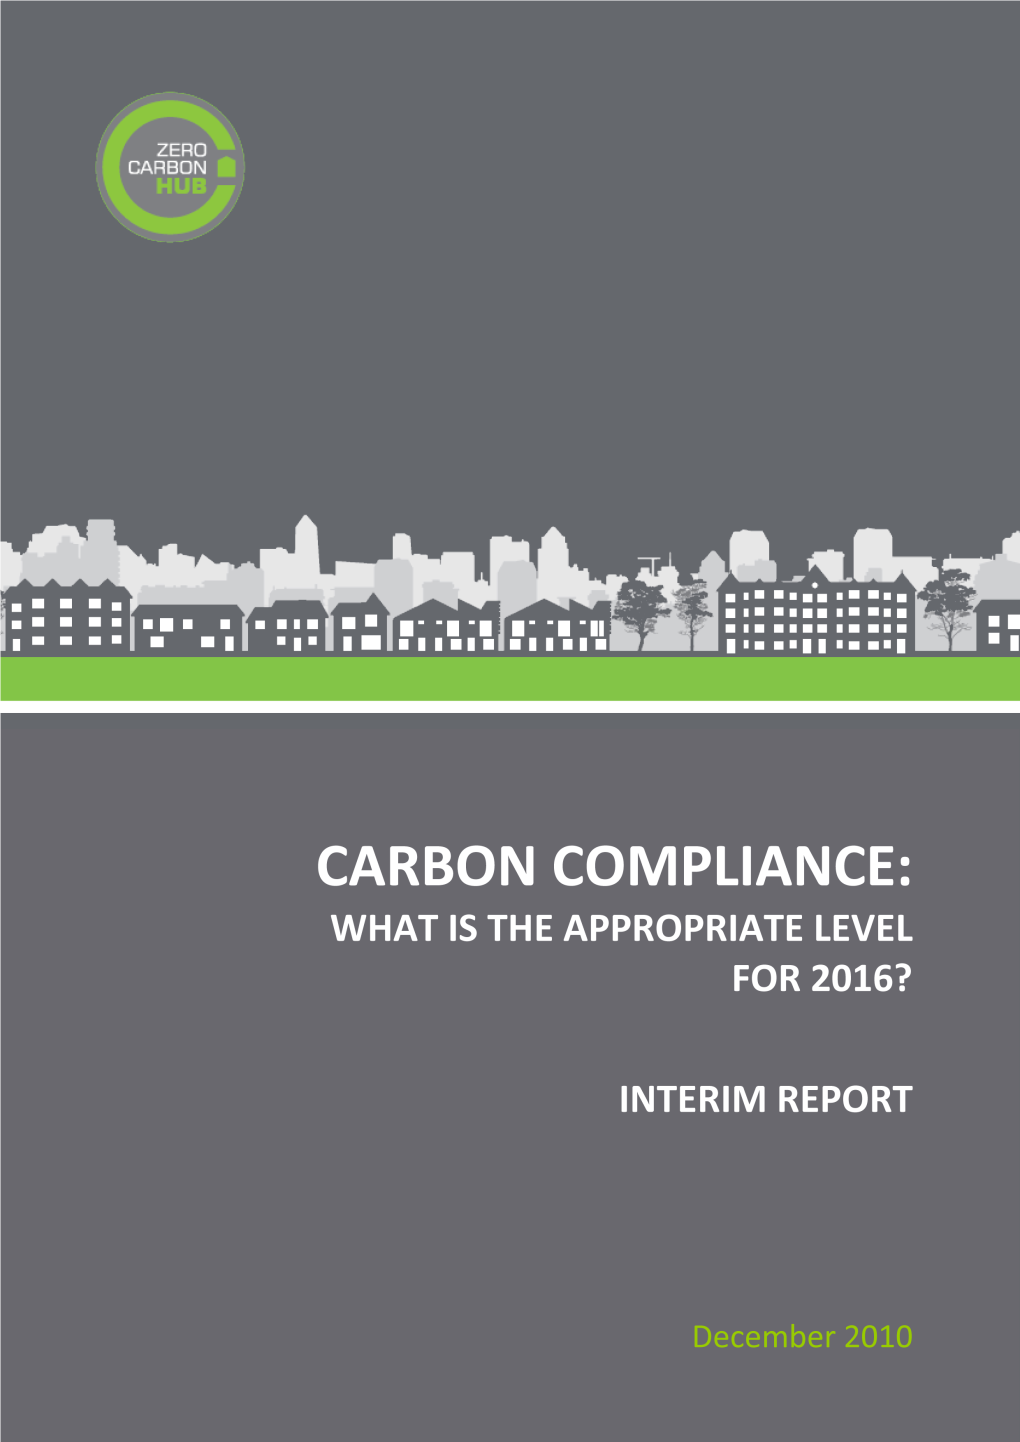 Carbon Compliance: What Is the Appropriate Level for 2016? INTERIM REPORT